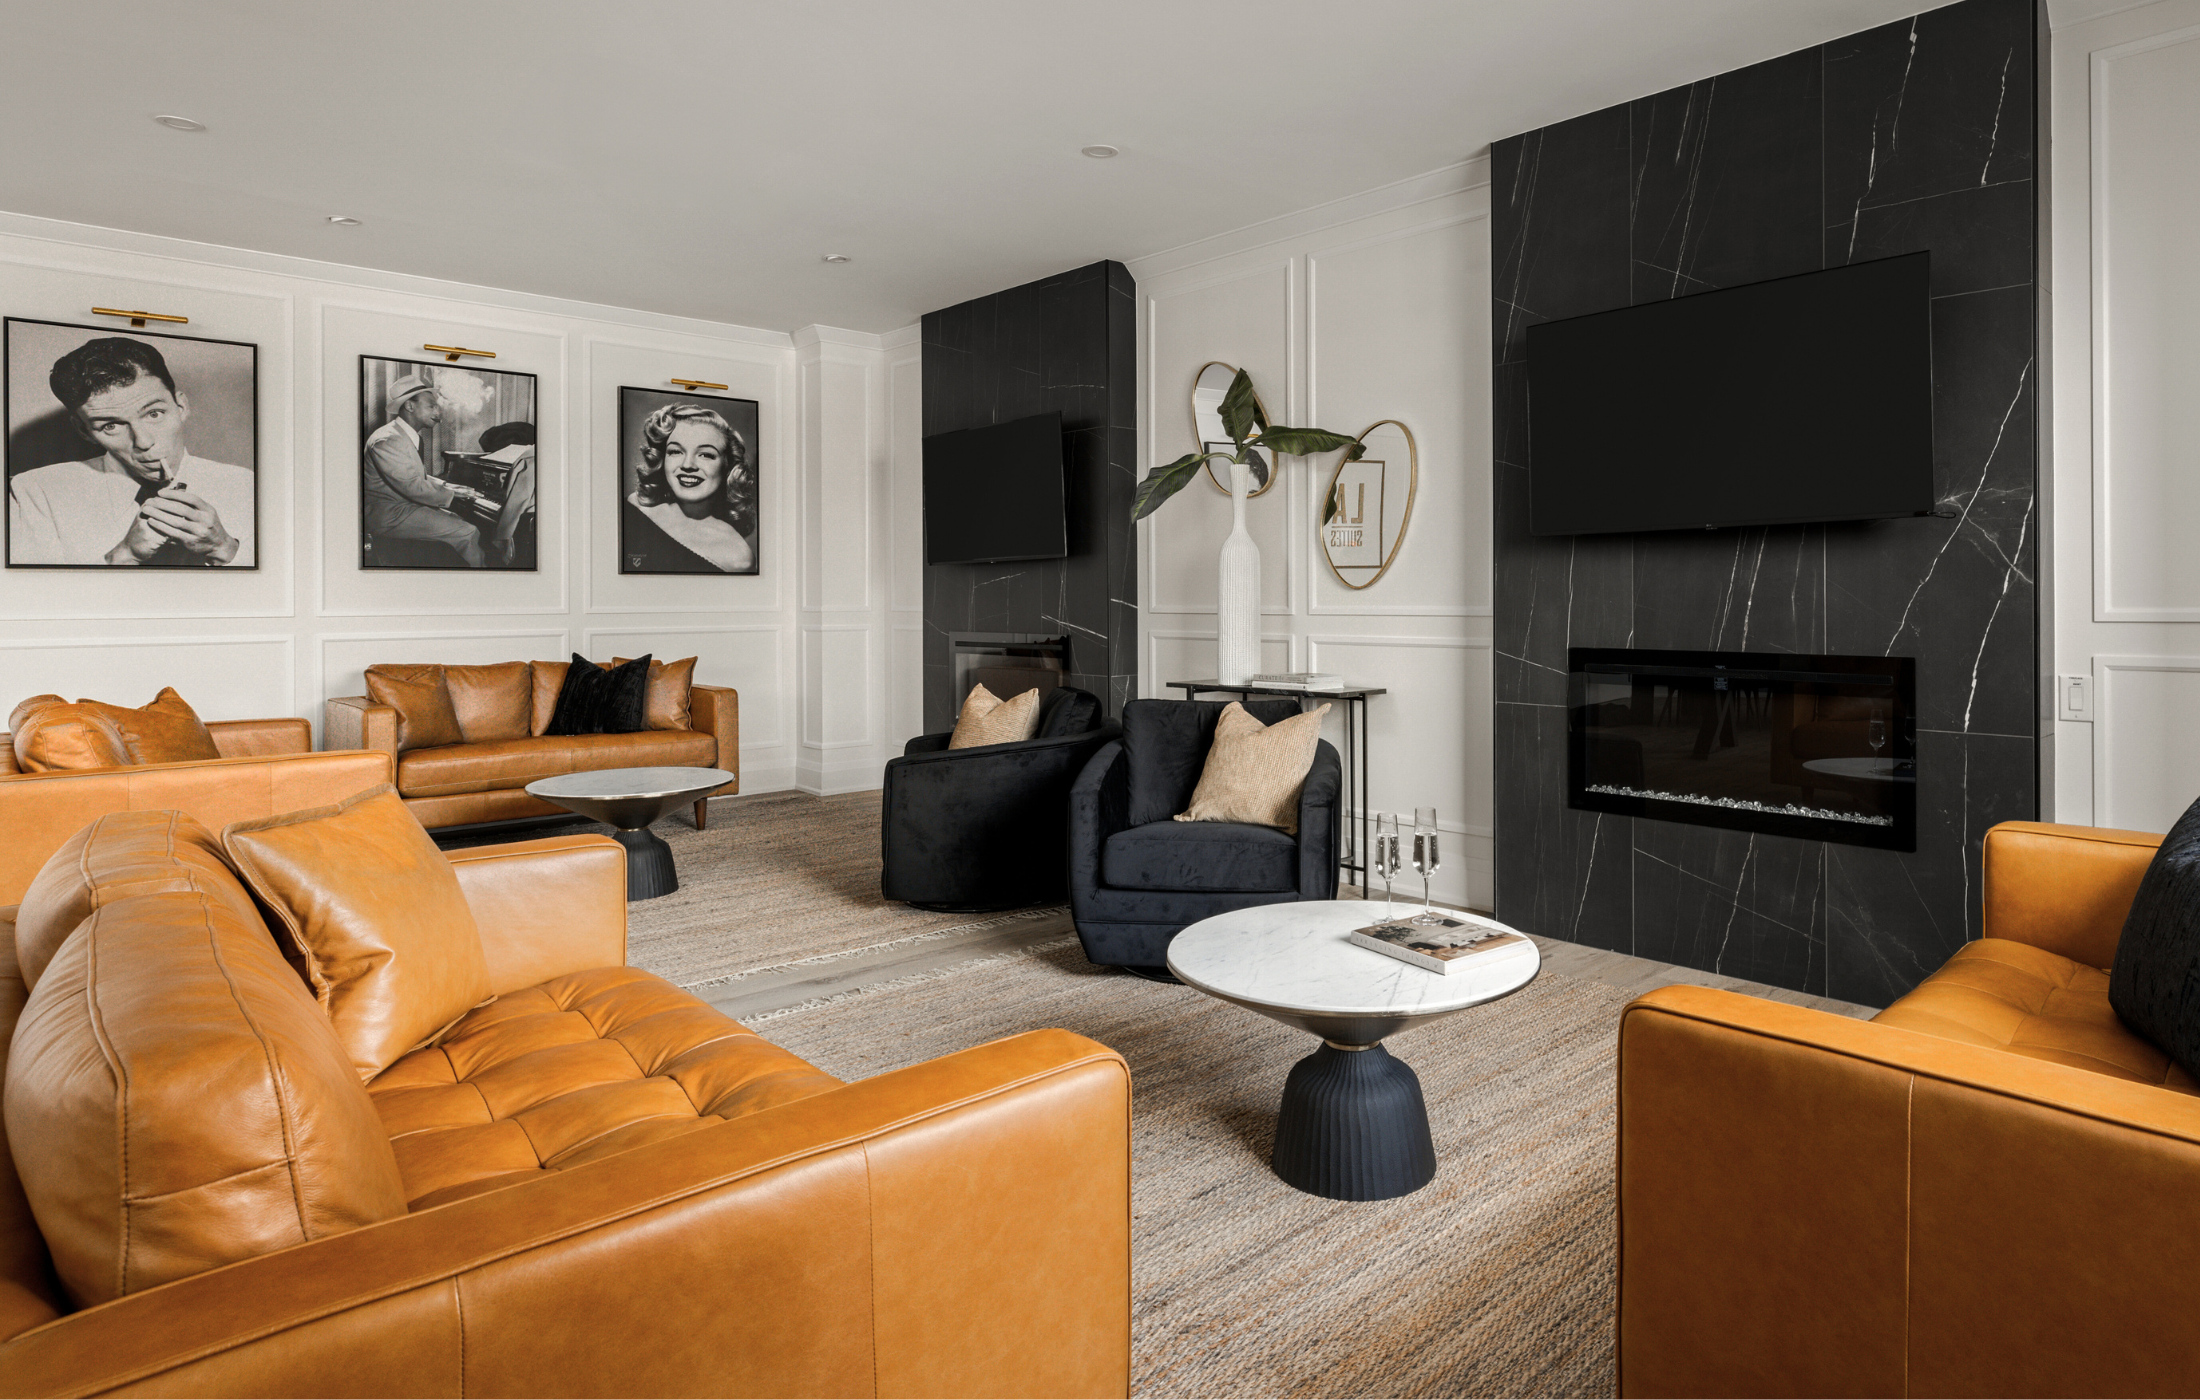 Stylish lounge with tan leather seating, black armchairs, and iconic black-and-white photographs, creating a retro-modern vibe.